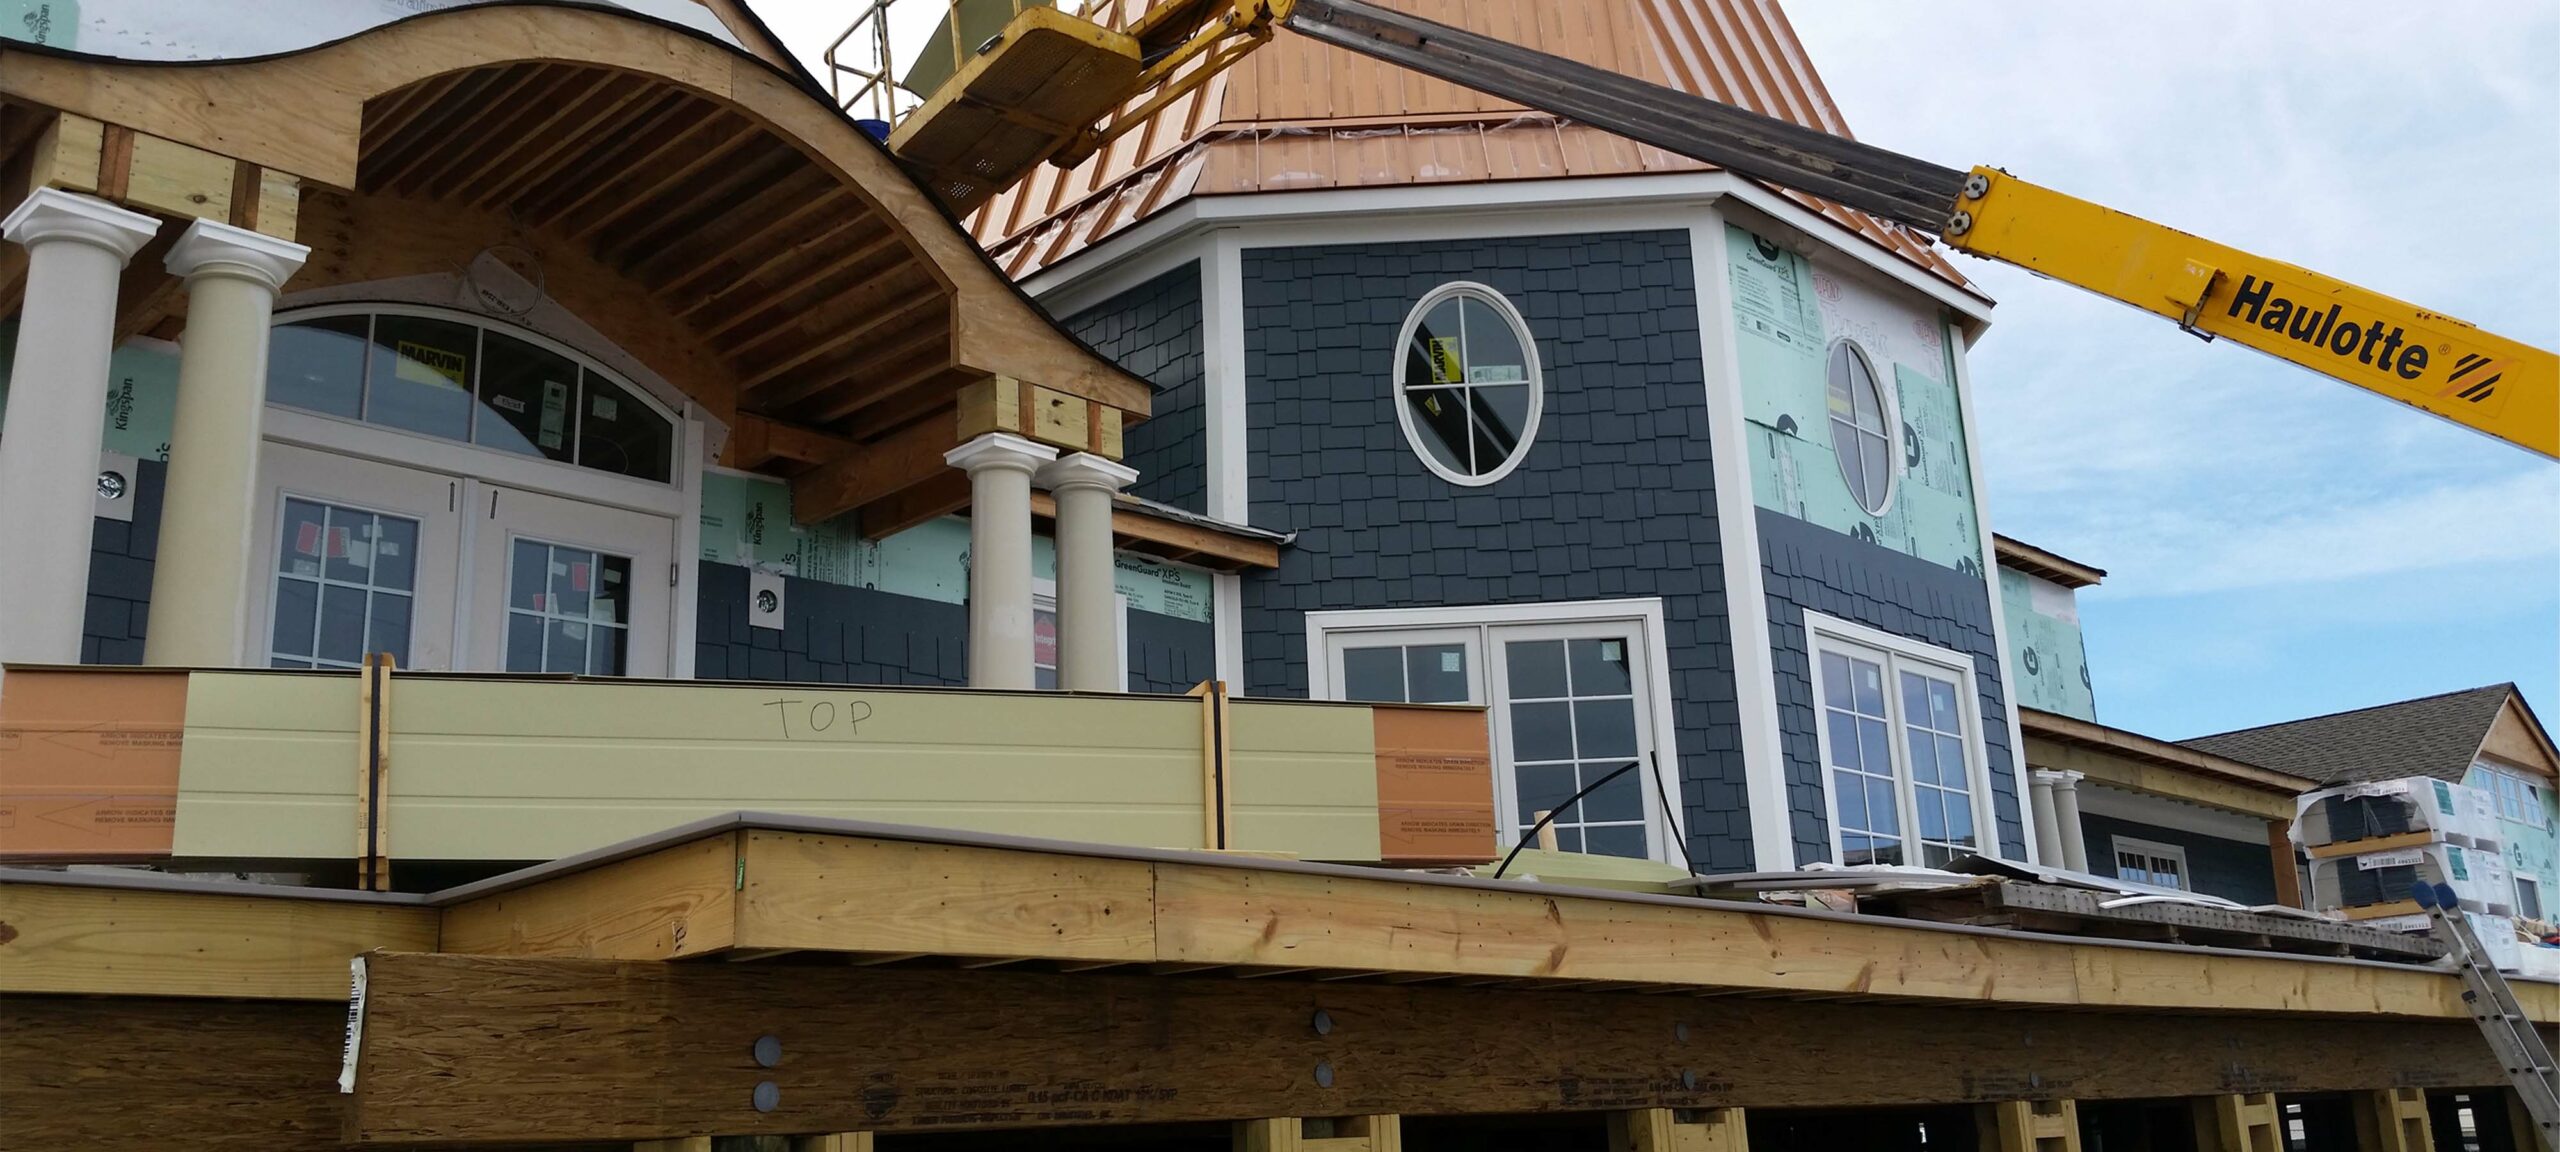 Quality Roof Installation & Replacement Services In Upper Black Eddy, PA